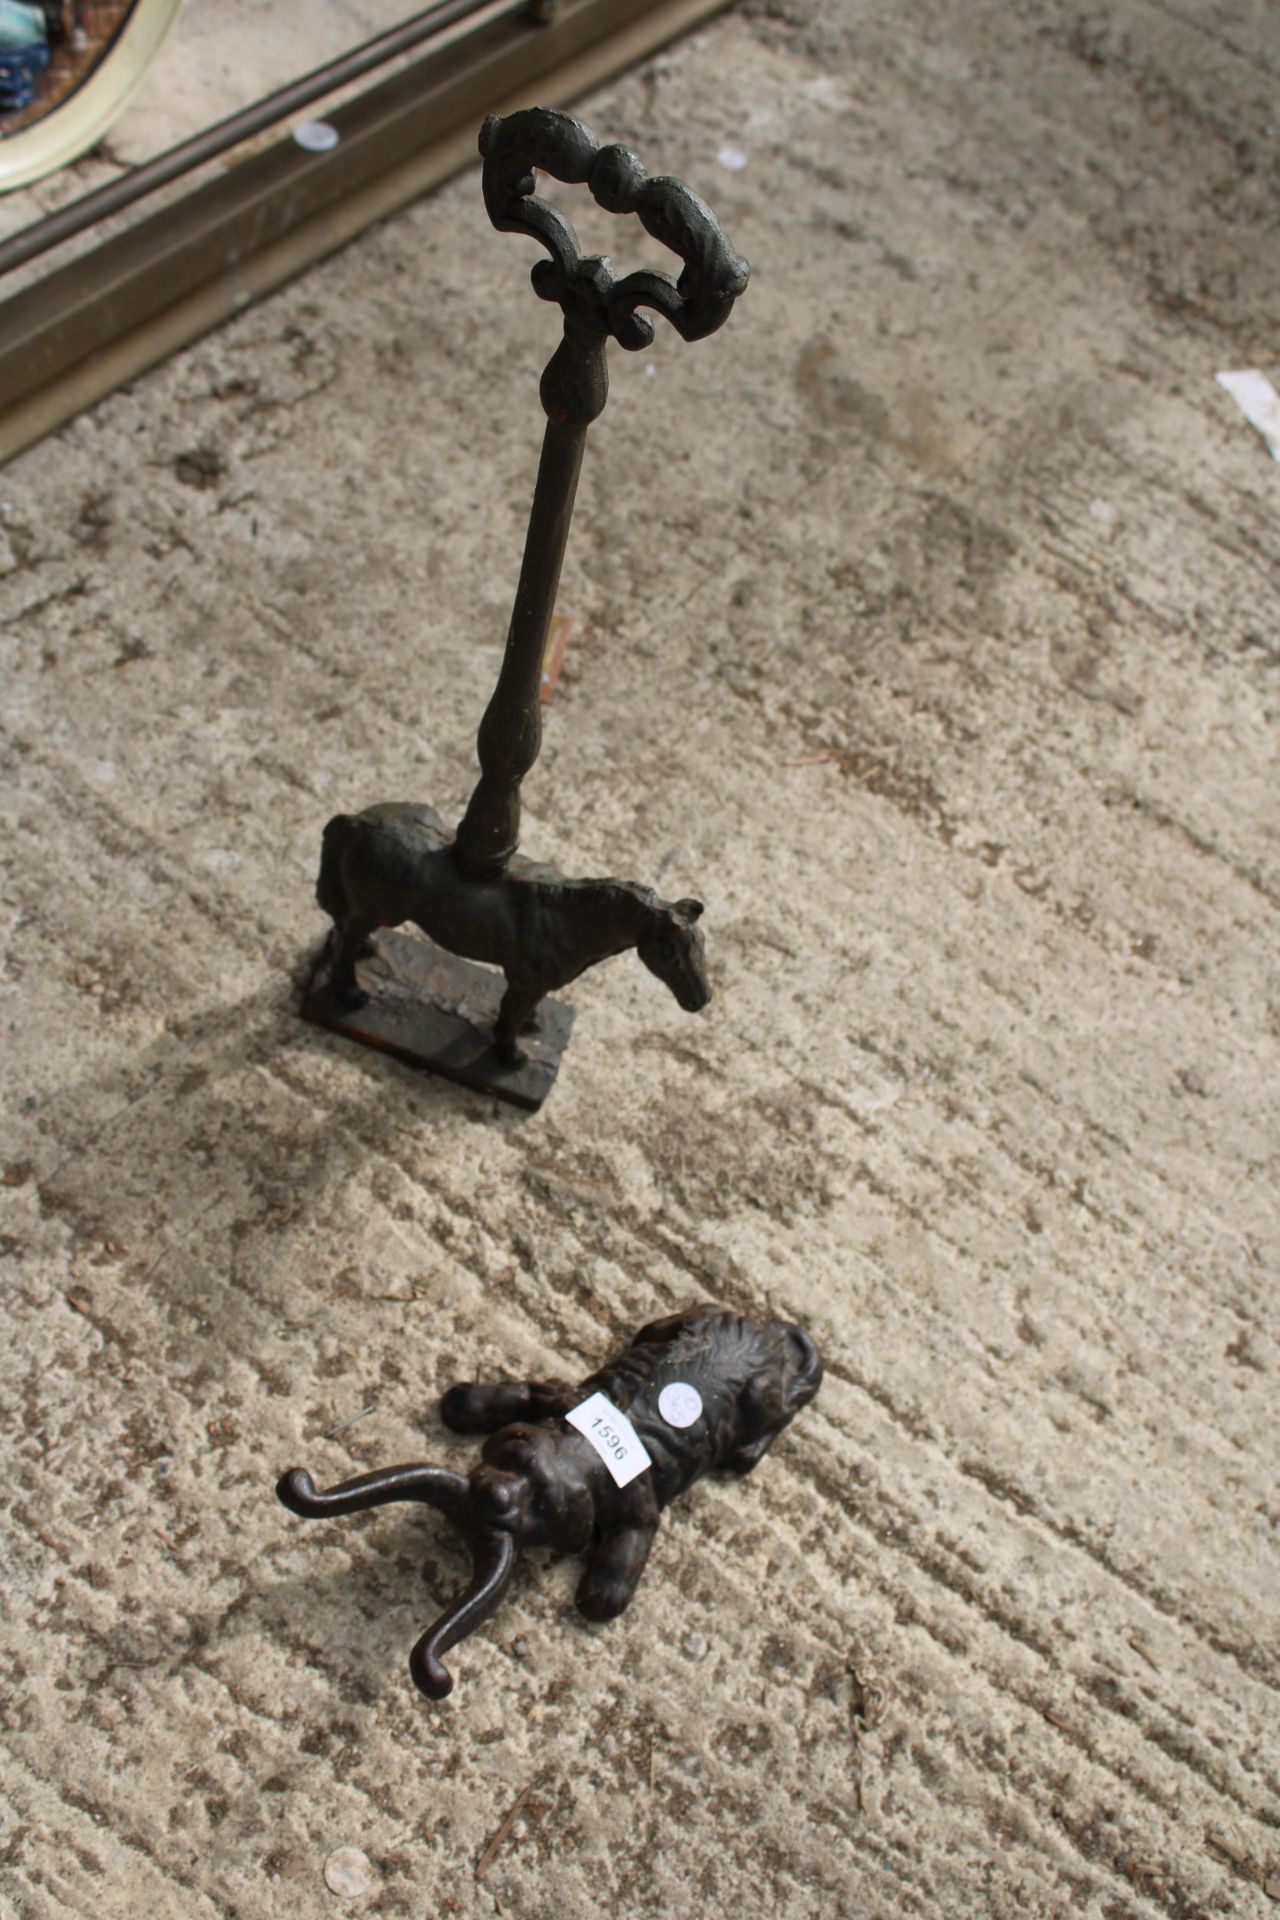 A VINTAGE CAST IRON HORSE DOOR STOP AND A DOG BOOT REMOVER